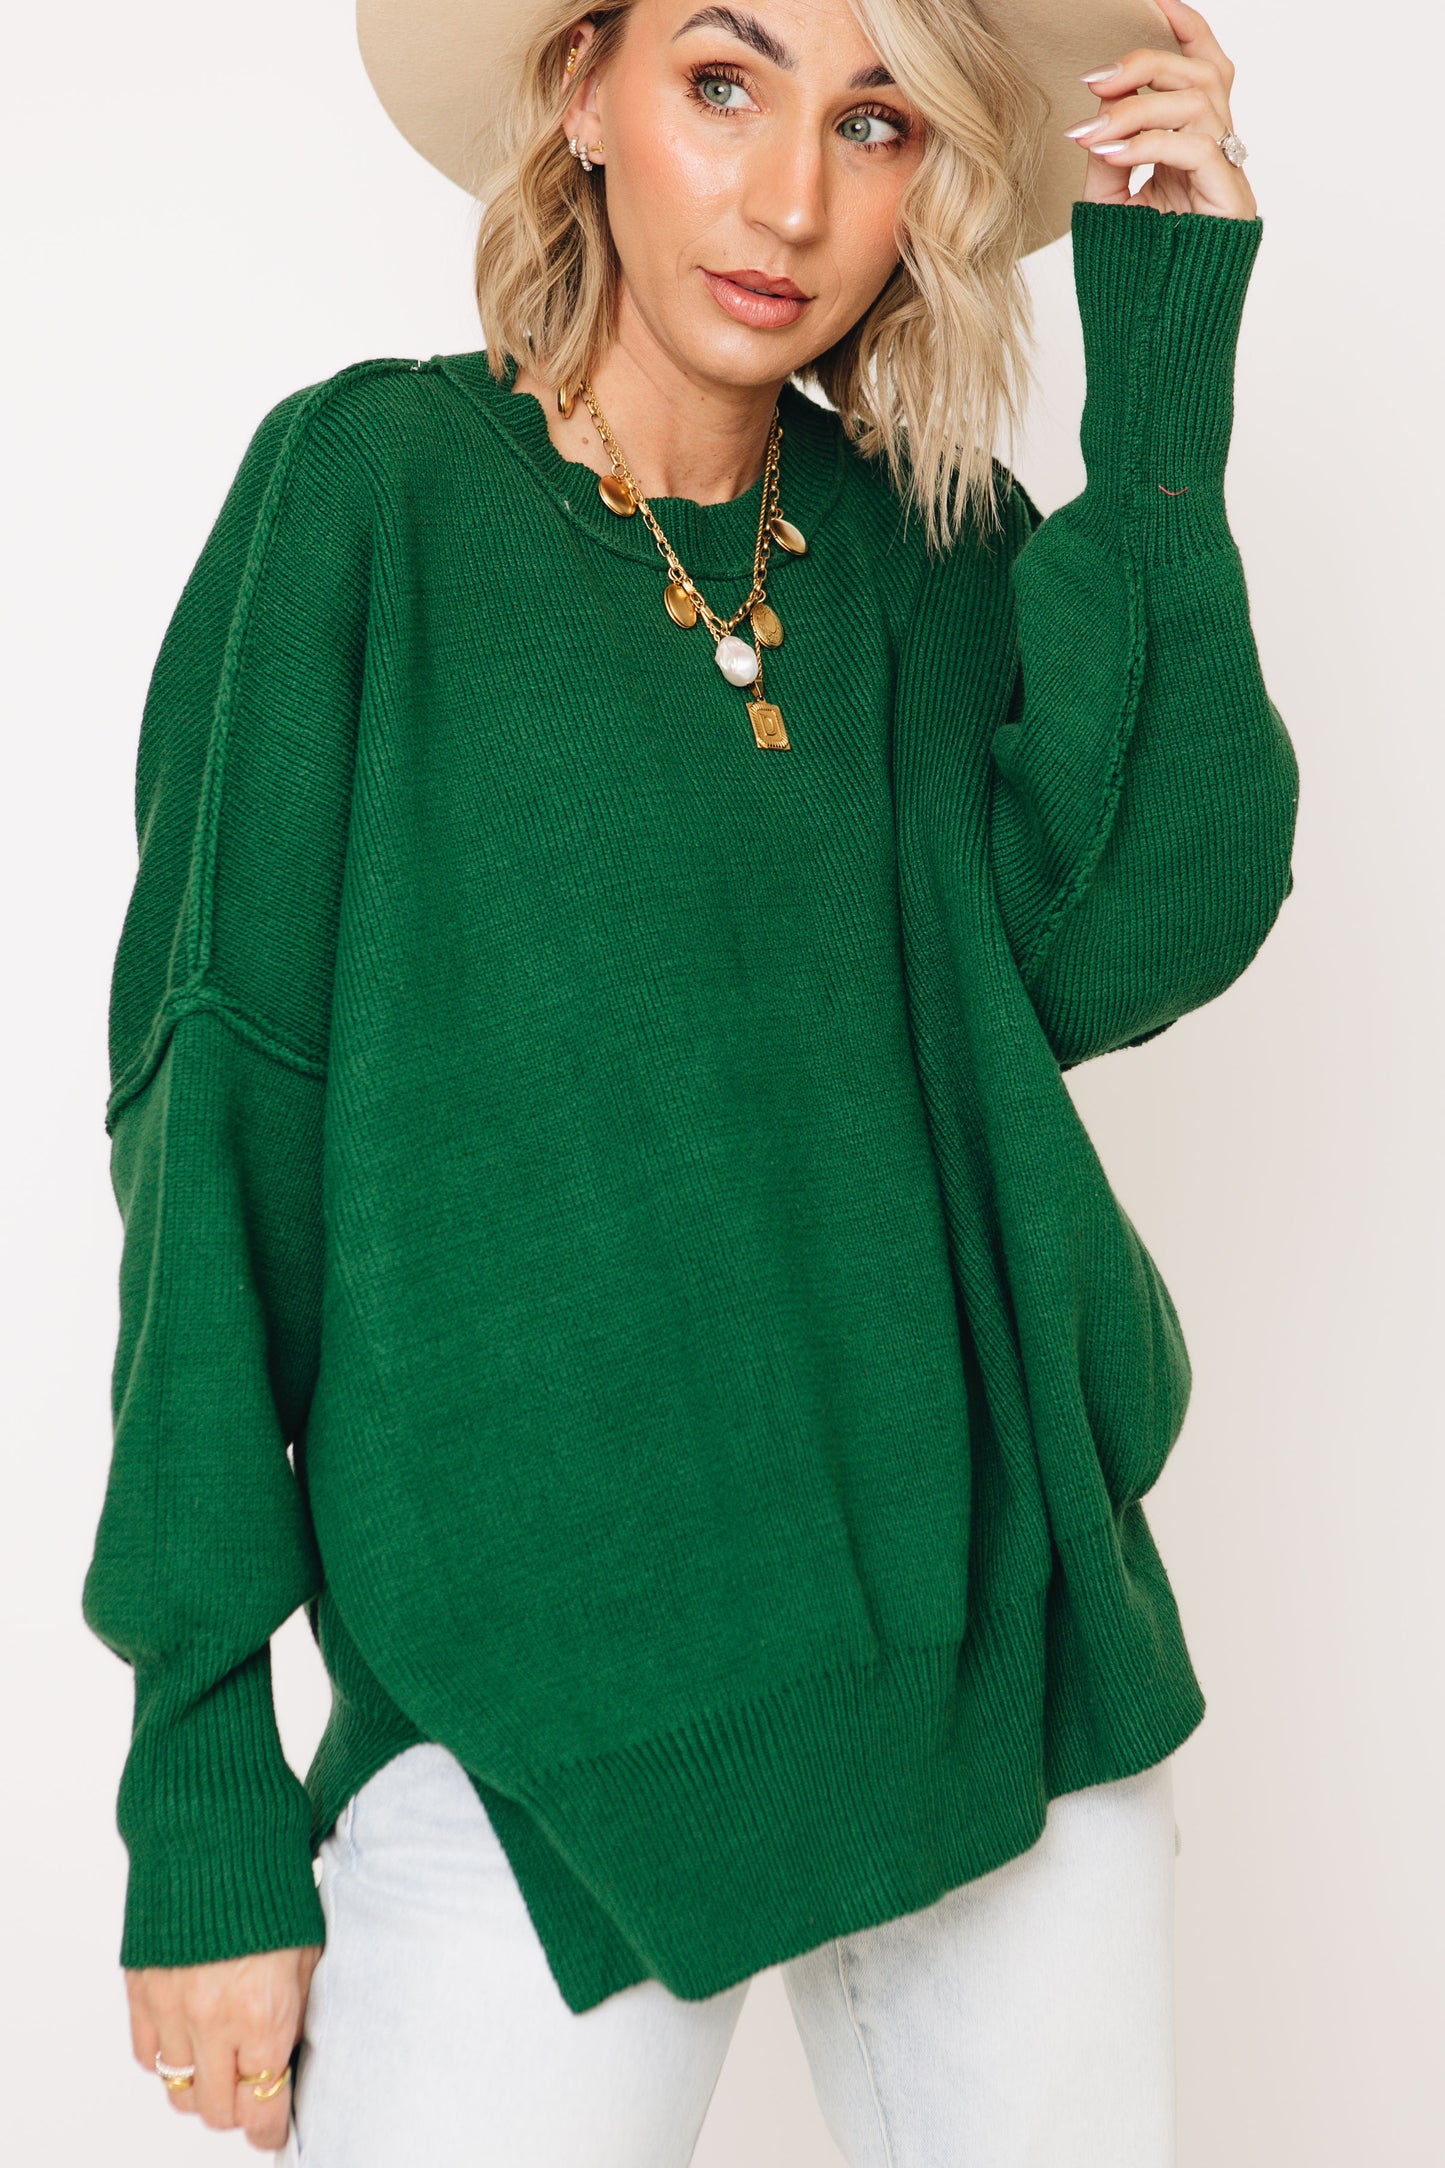 RESTOCK EXPECTED 10/2 - FP DUPE Drop Shoulder Sleeve Sweater (S-2XL)